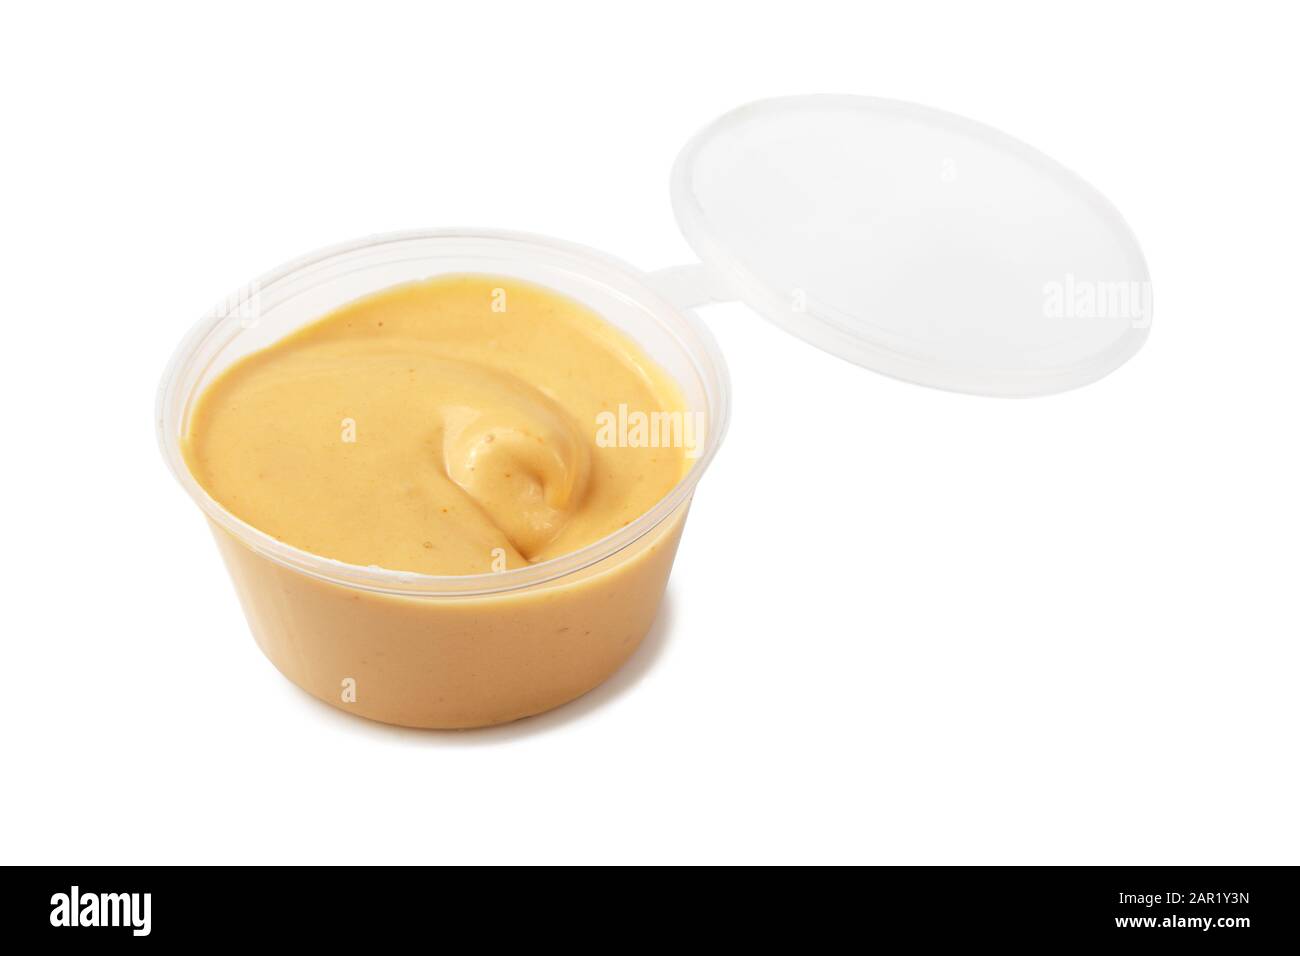 https://c8.alamy.com/comp/2AR1Y3N/dip-sauce-in-a-plastic-take-away-container-isolated-on-white-background-2AR1Y3N.jpg